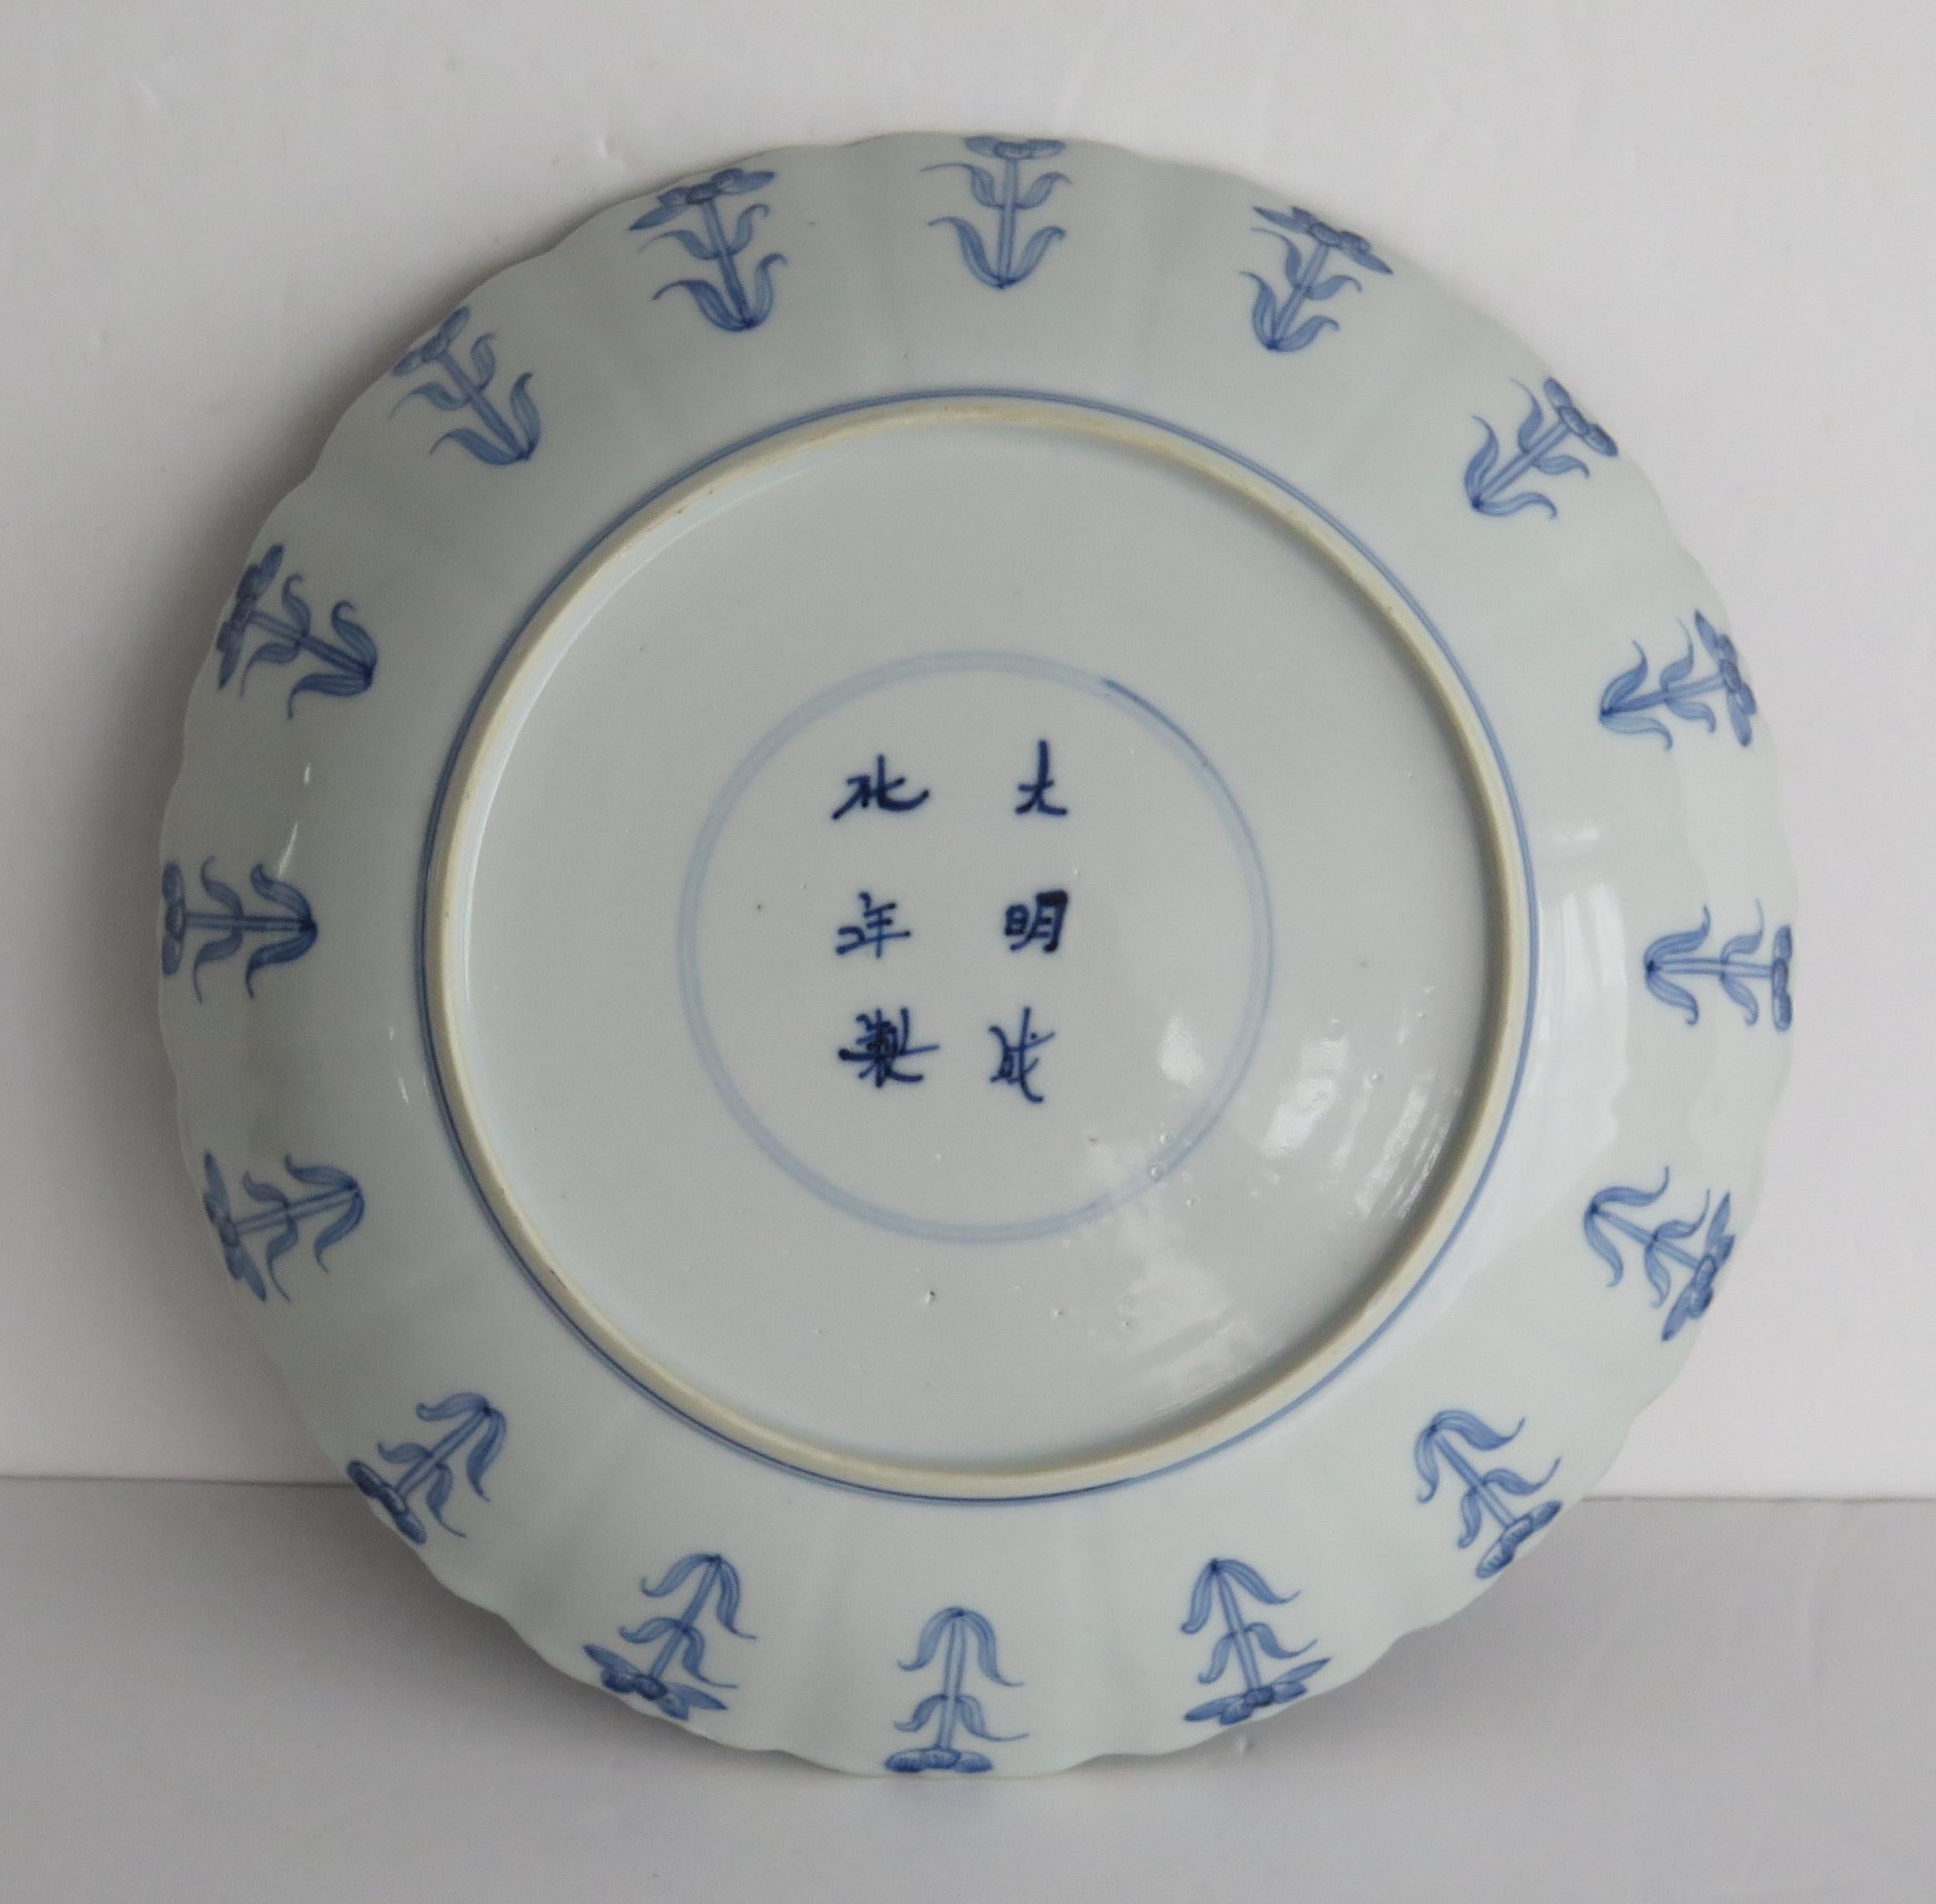 Kangxi Period Chinese Dish or Plate Porcelain Blue & White Chenghua Mark Ca 1680 For Sale 2